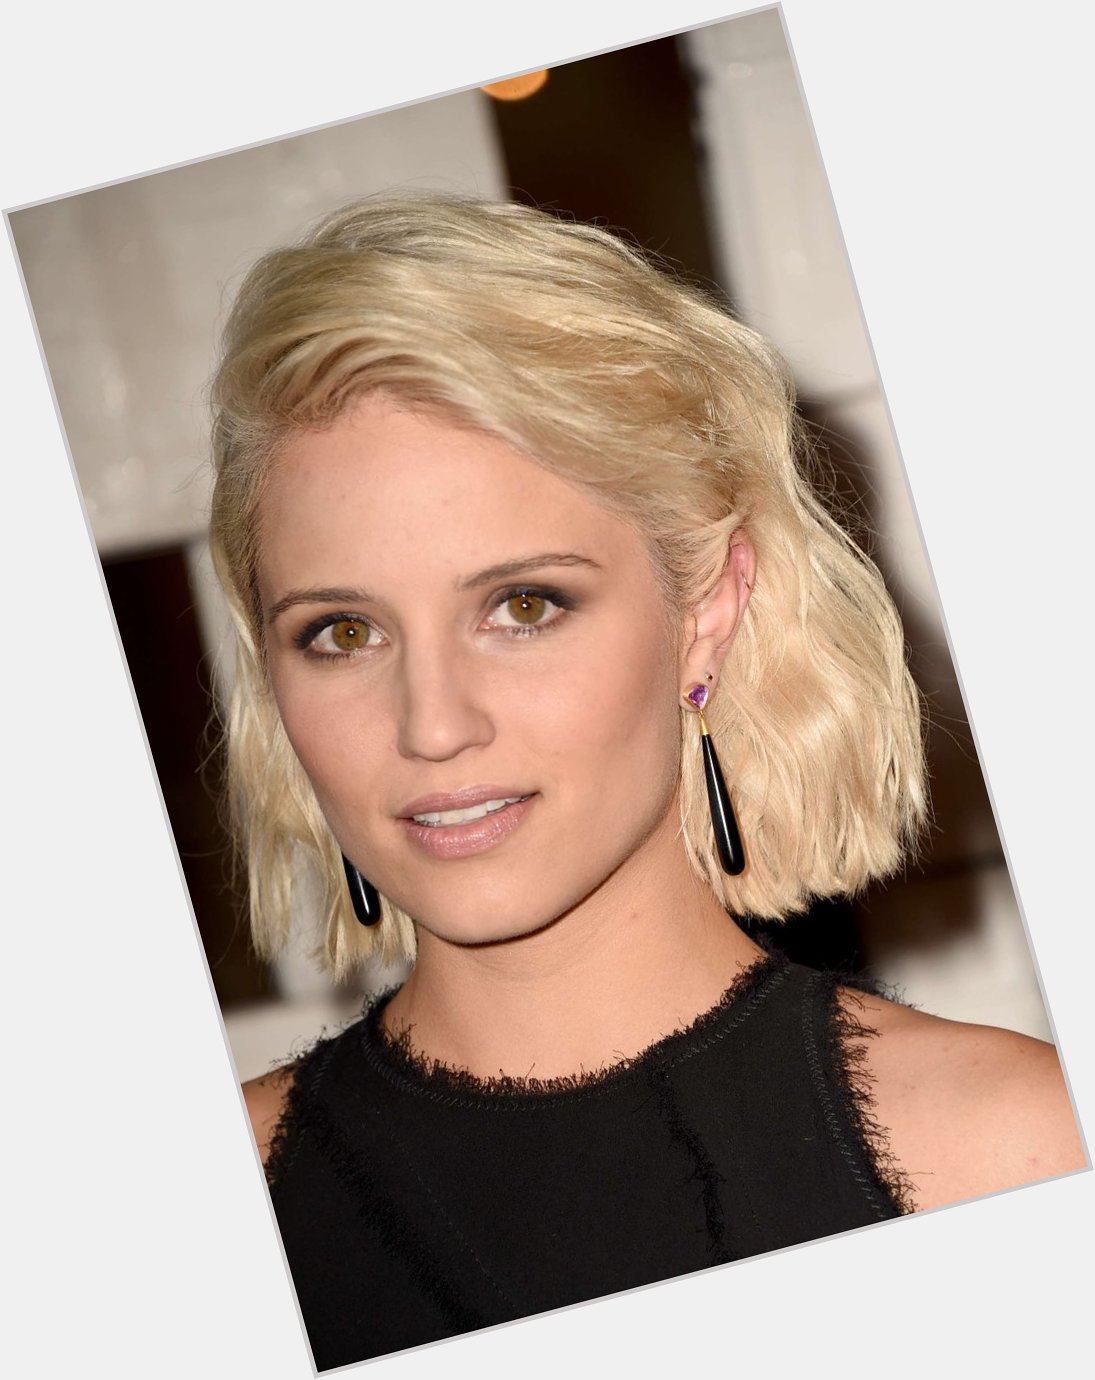 Happy Birthday to fashionista & beauty queen, Dianna Agron. She doesn\t look a day over 21 